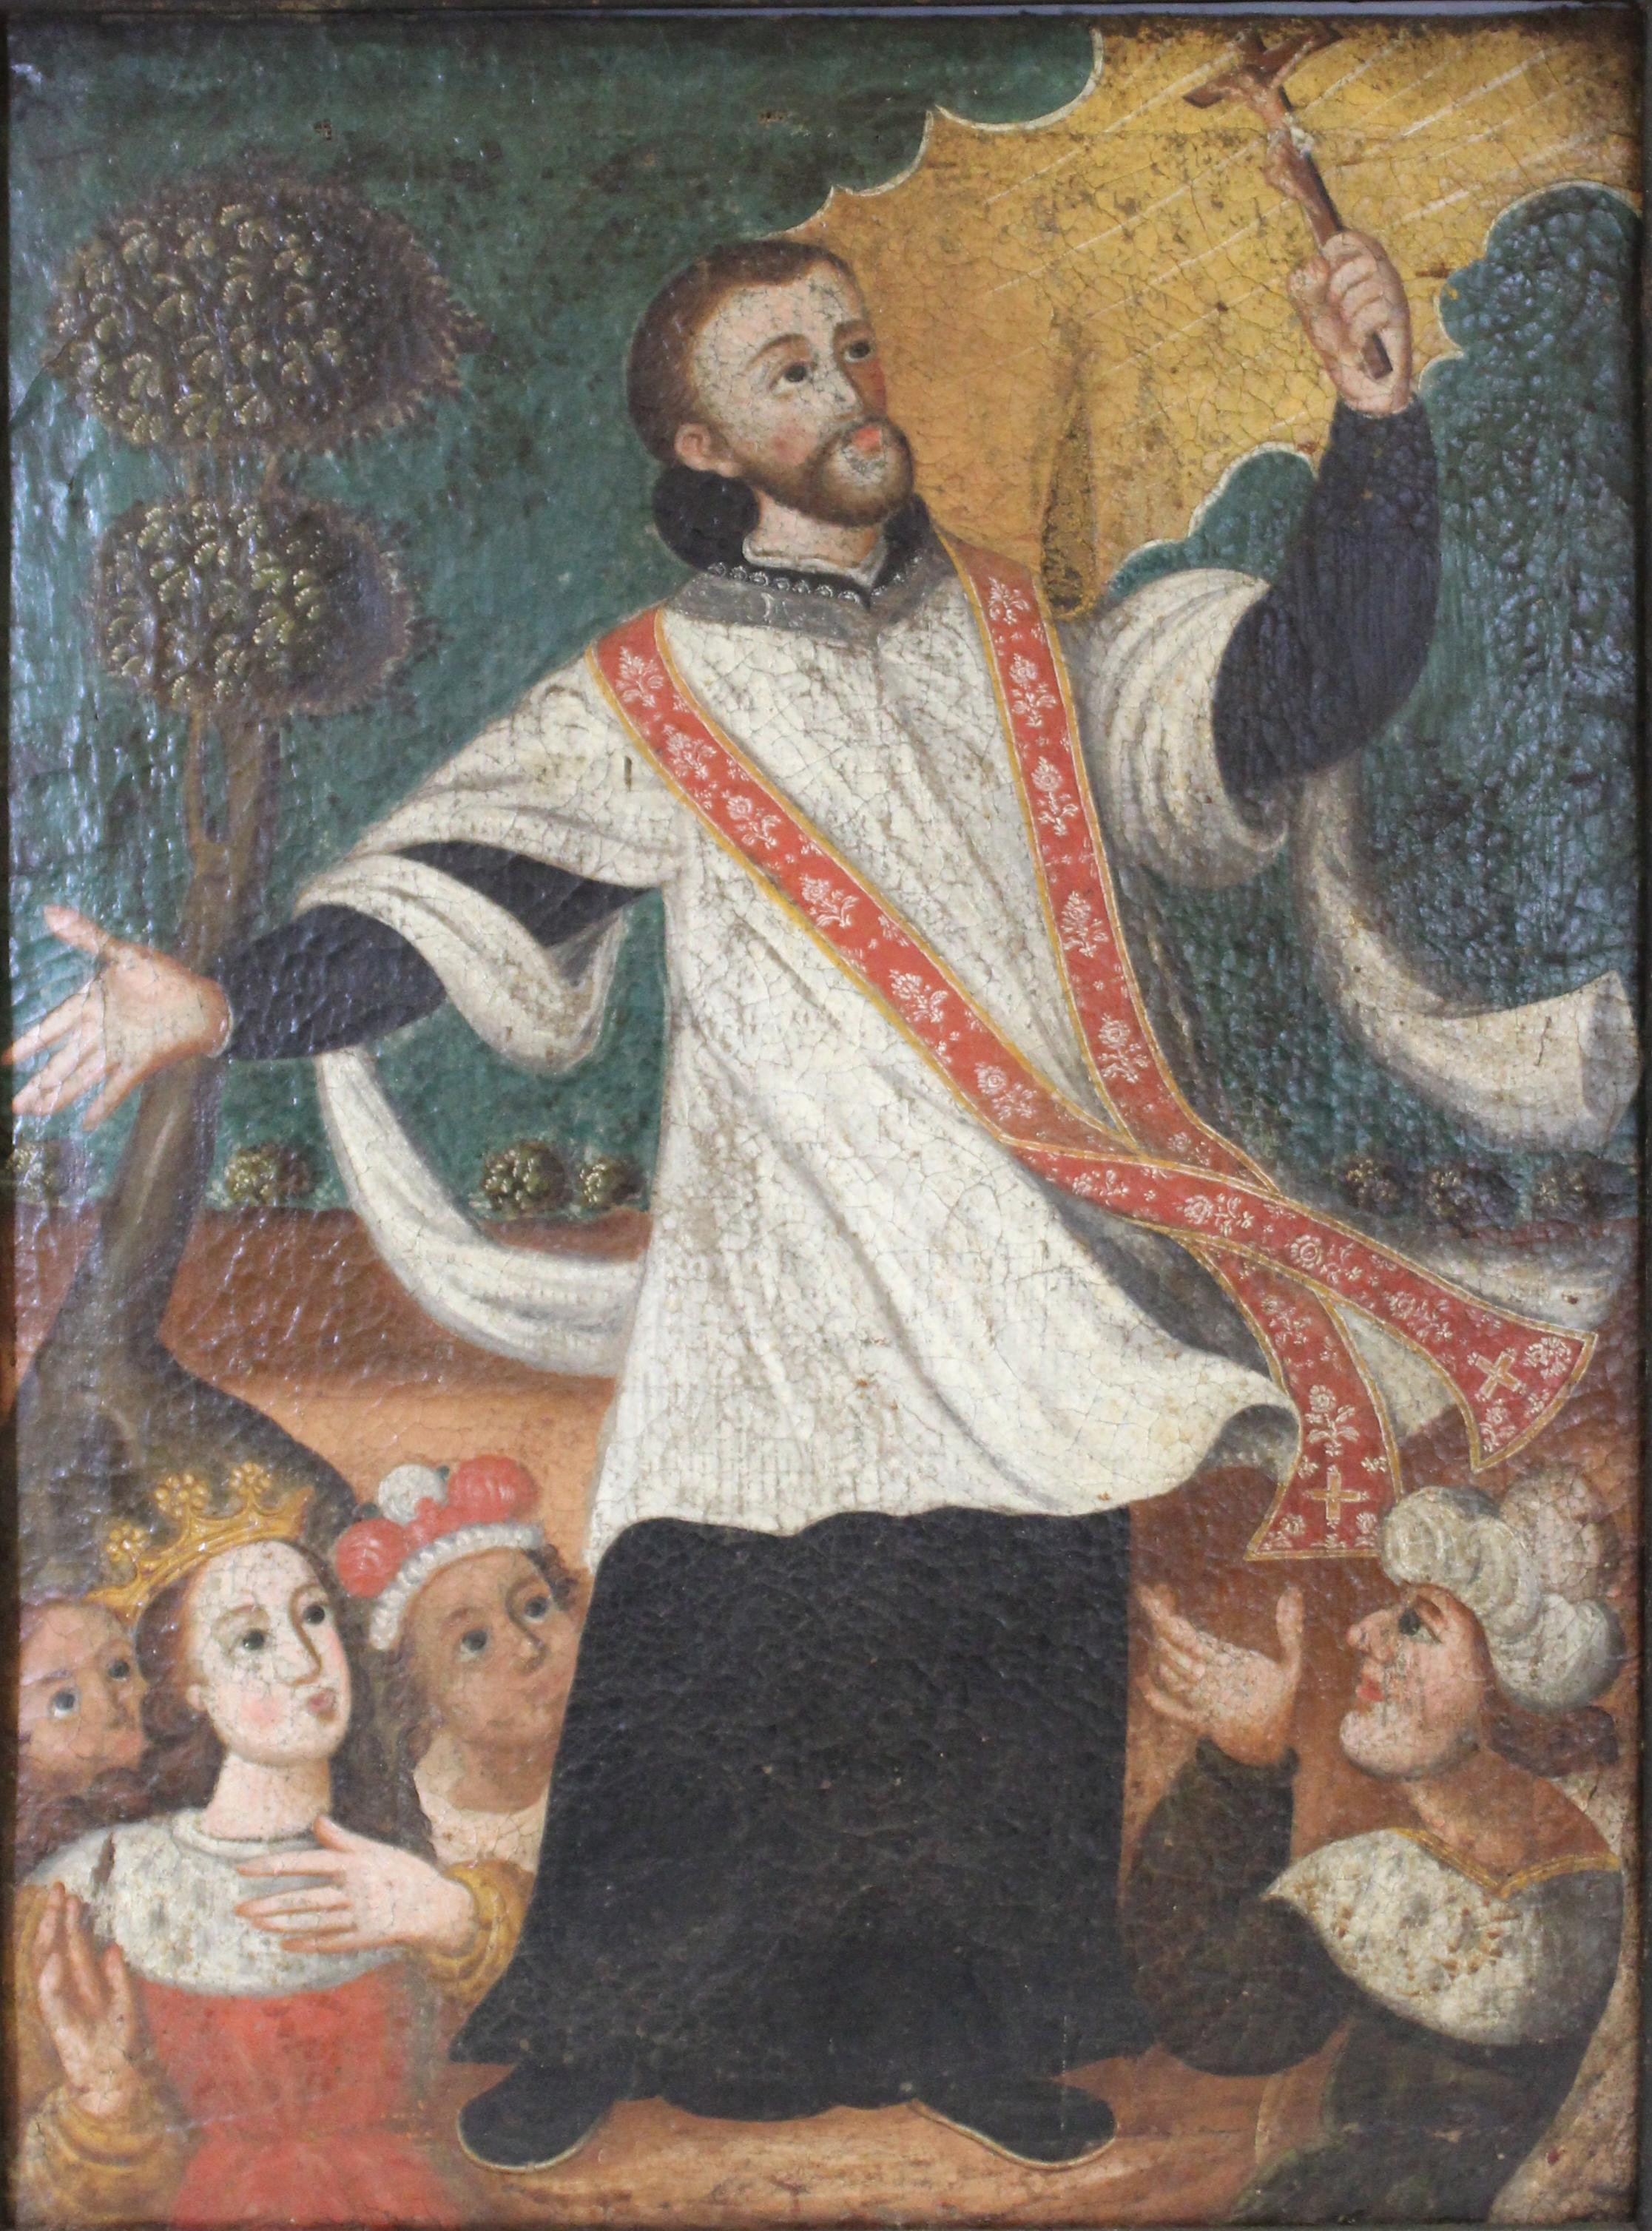 Spanish Colonial oil on canvas painting depicting the Spanish Jesuit priest and Saint Peter Claver. The painting shows the saint in his priest attire, holding up a crucifix in ecstasy, surrounded by noblemen at his feet. The painting is set within